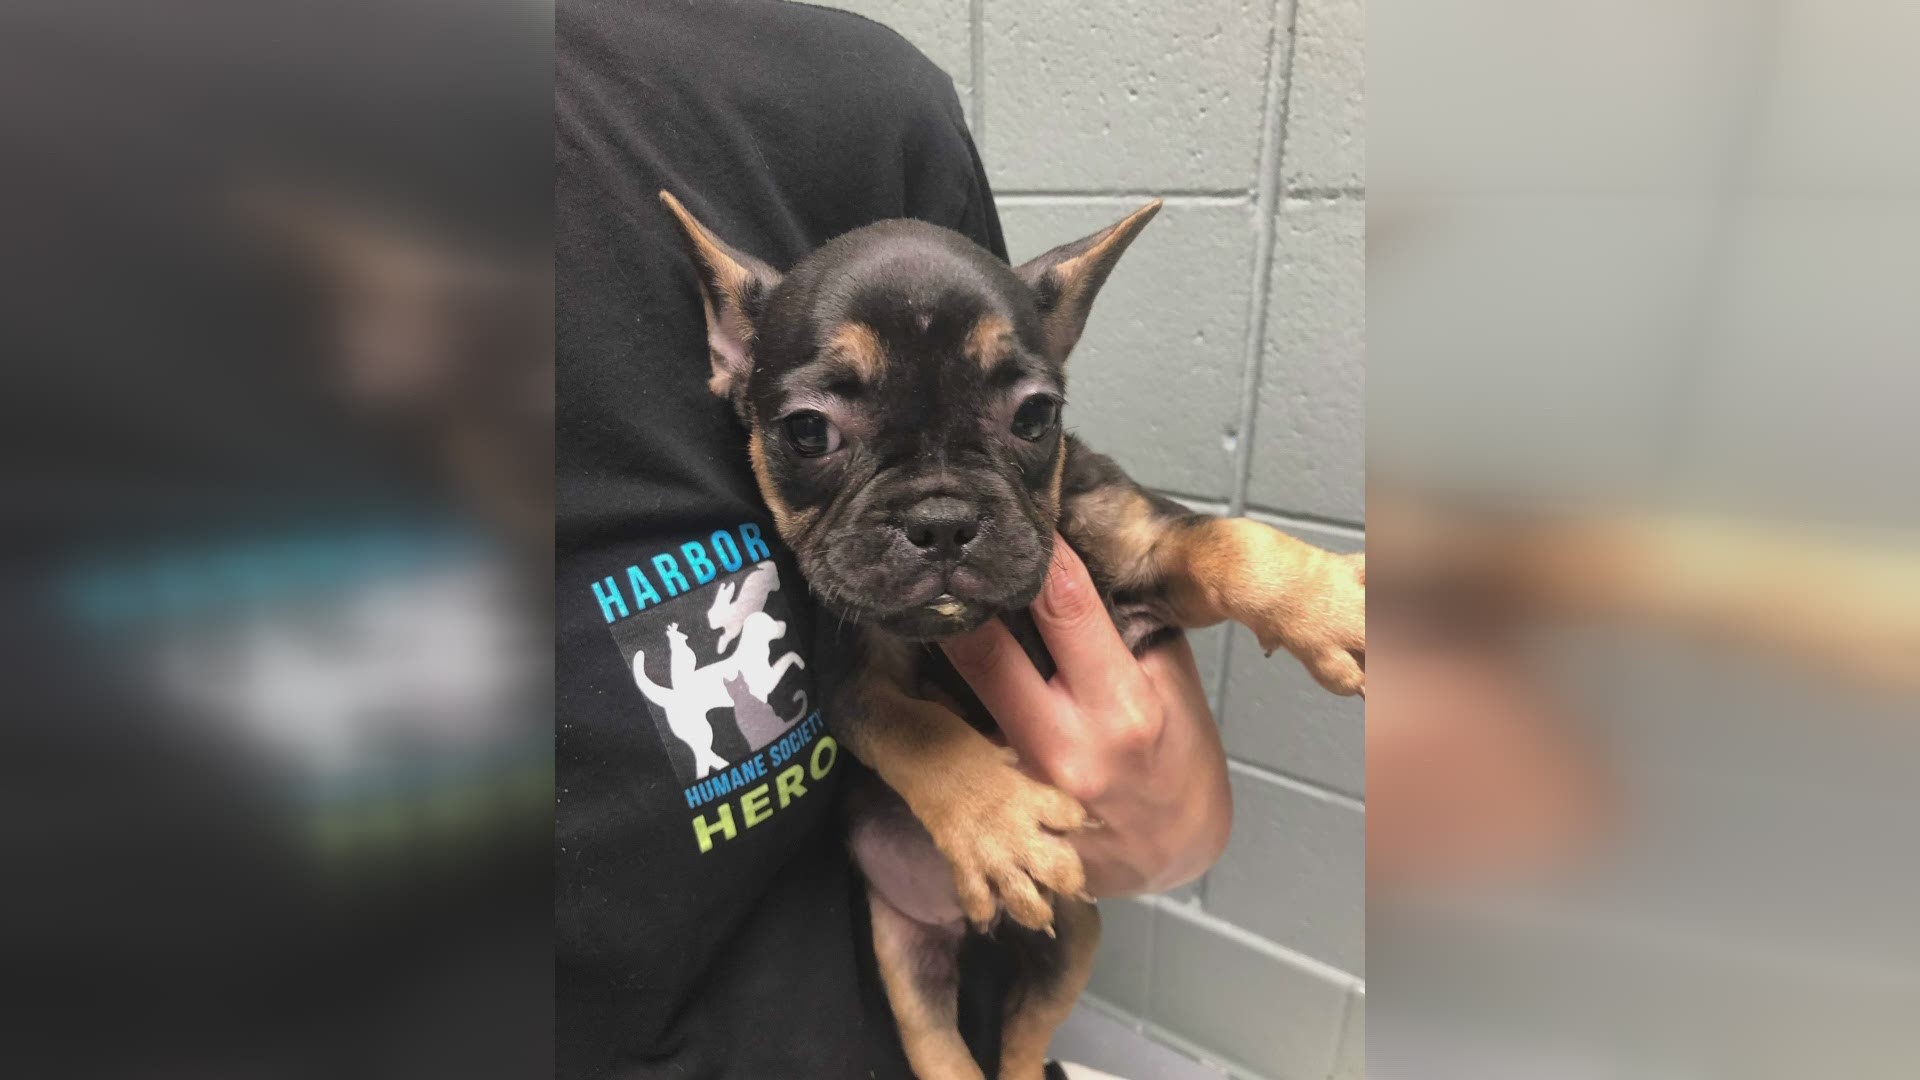 The Sheriff’s Office said the dogs are valued at about $6,000 each.